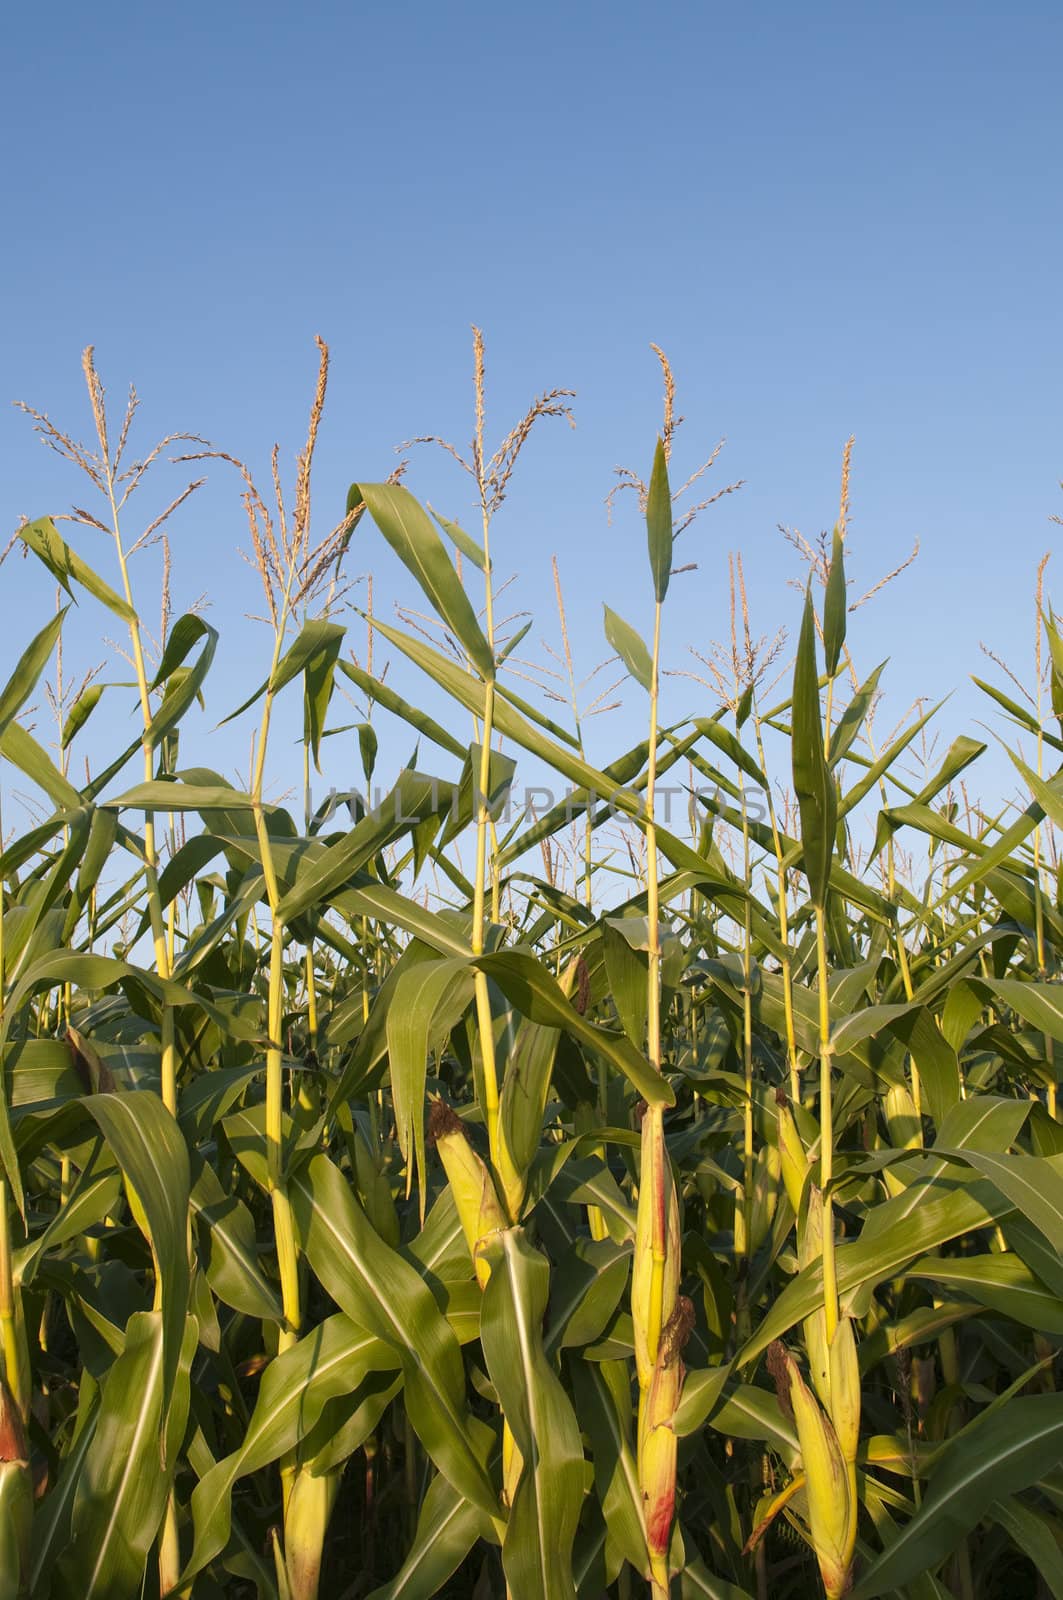 Corn ready to be harvested with copy space in the blue sky